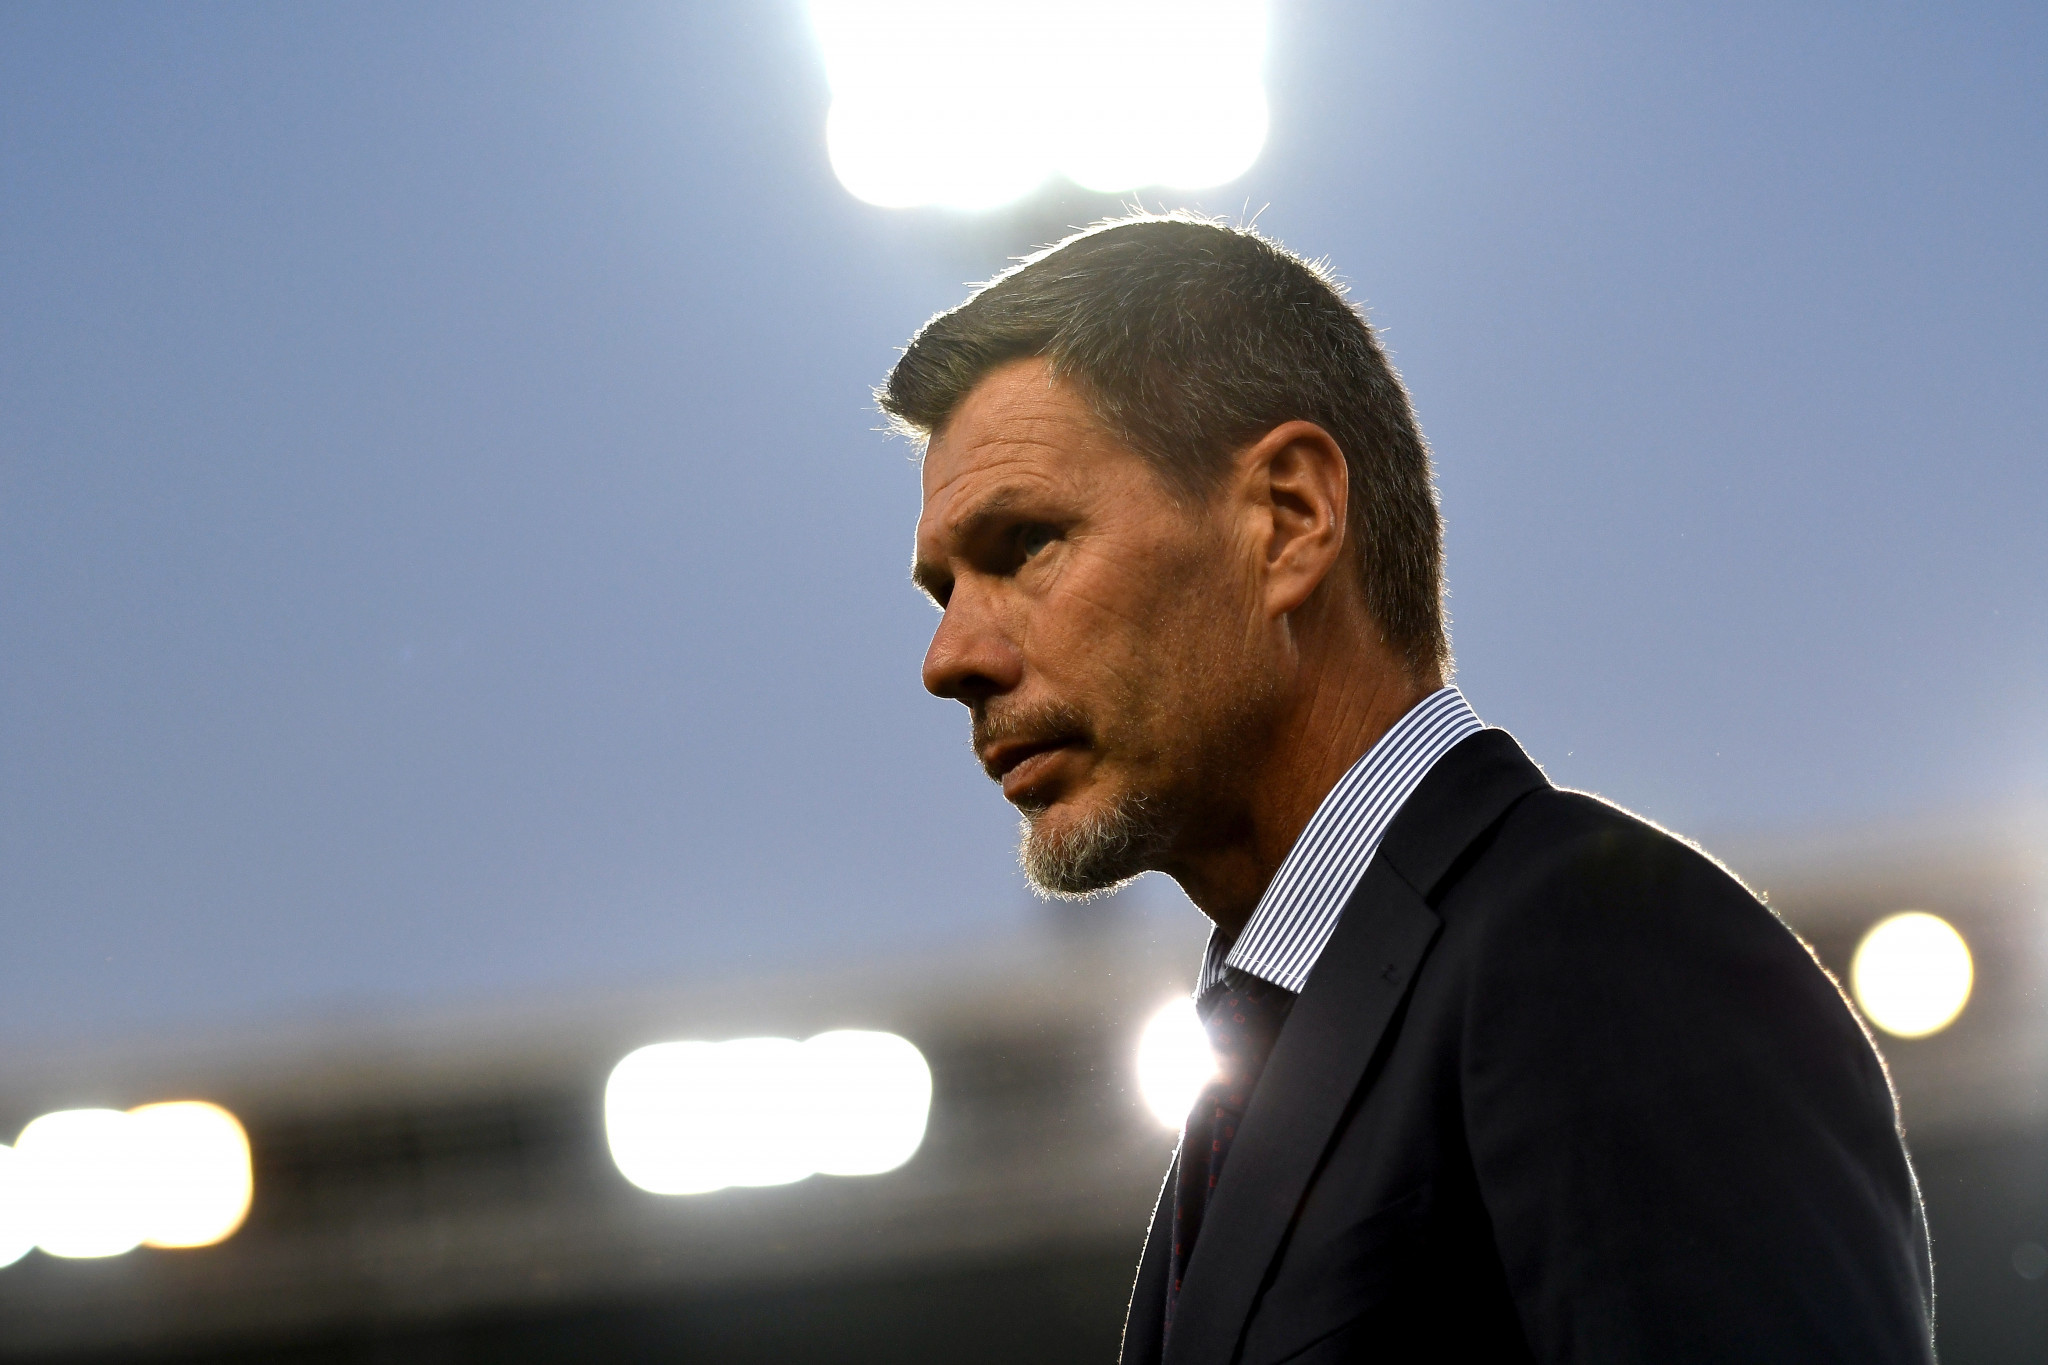 UEFA’s head of football Zvonimir Boban believes the proposals are unworkable, but Fouzi Lekjaa said European opposition is discriminating against 